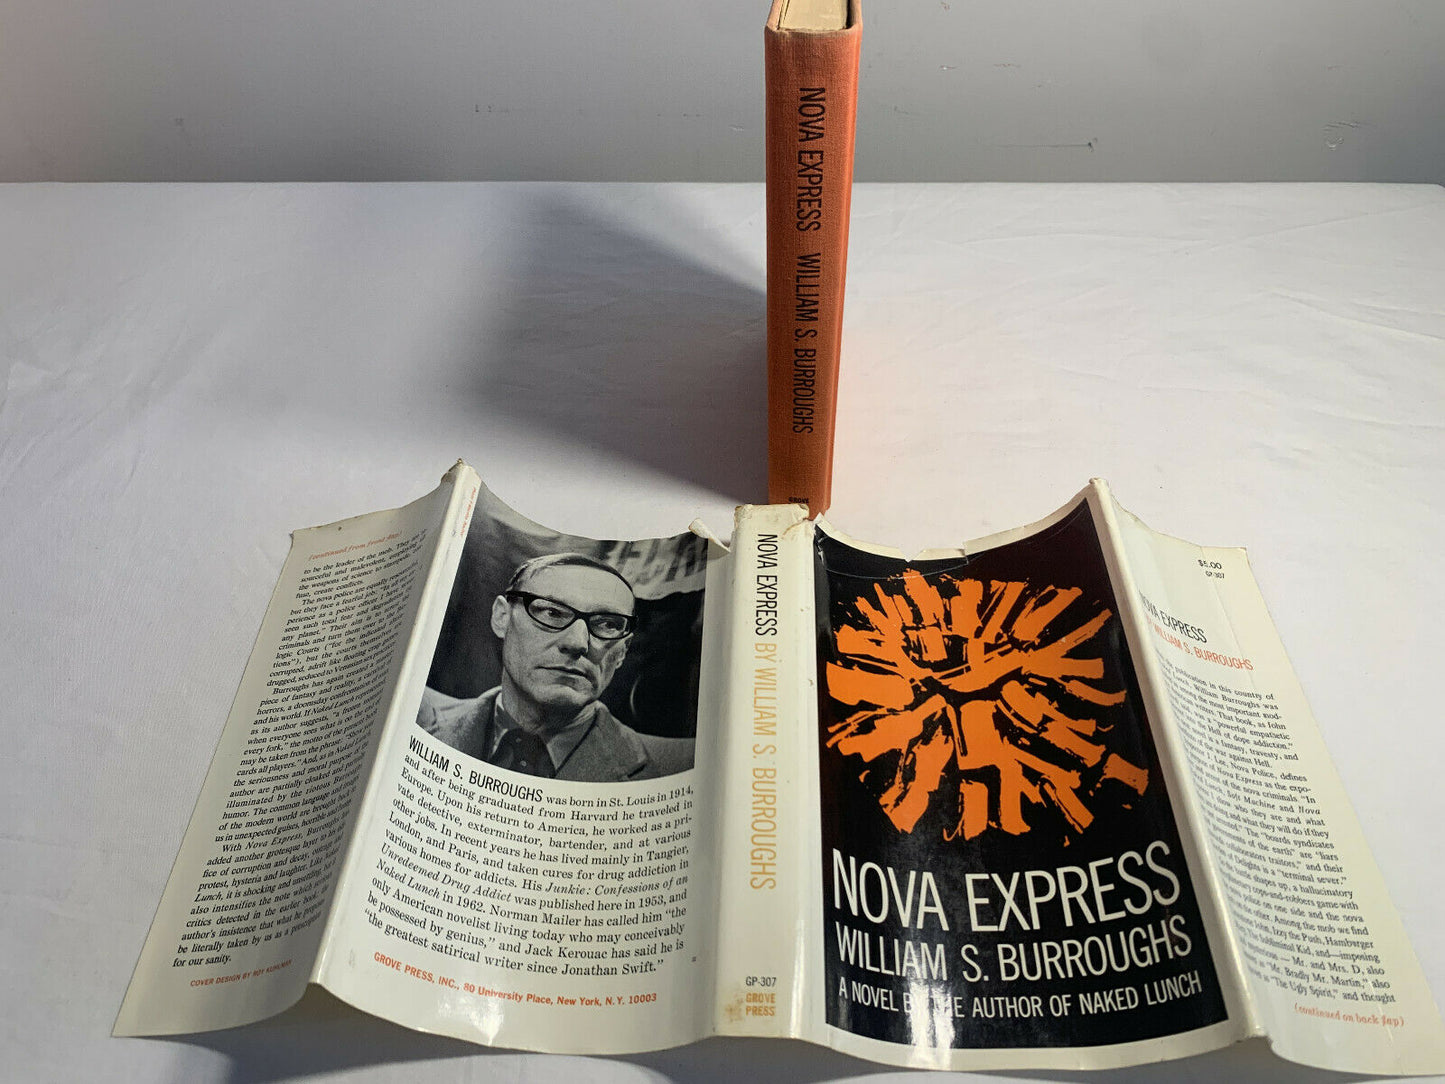 Nova Express by William S. Burroughs 1964 First Printing Hardcover